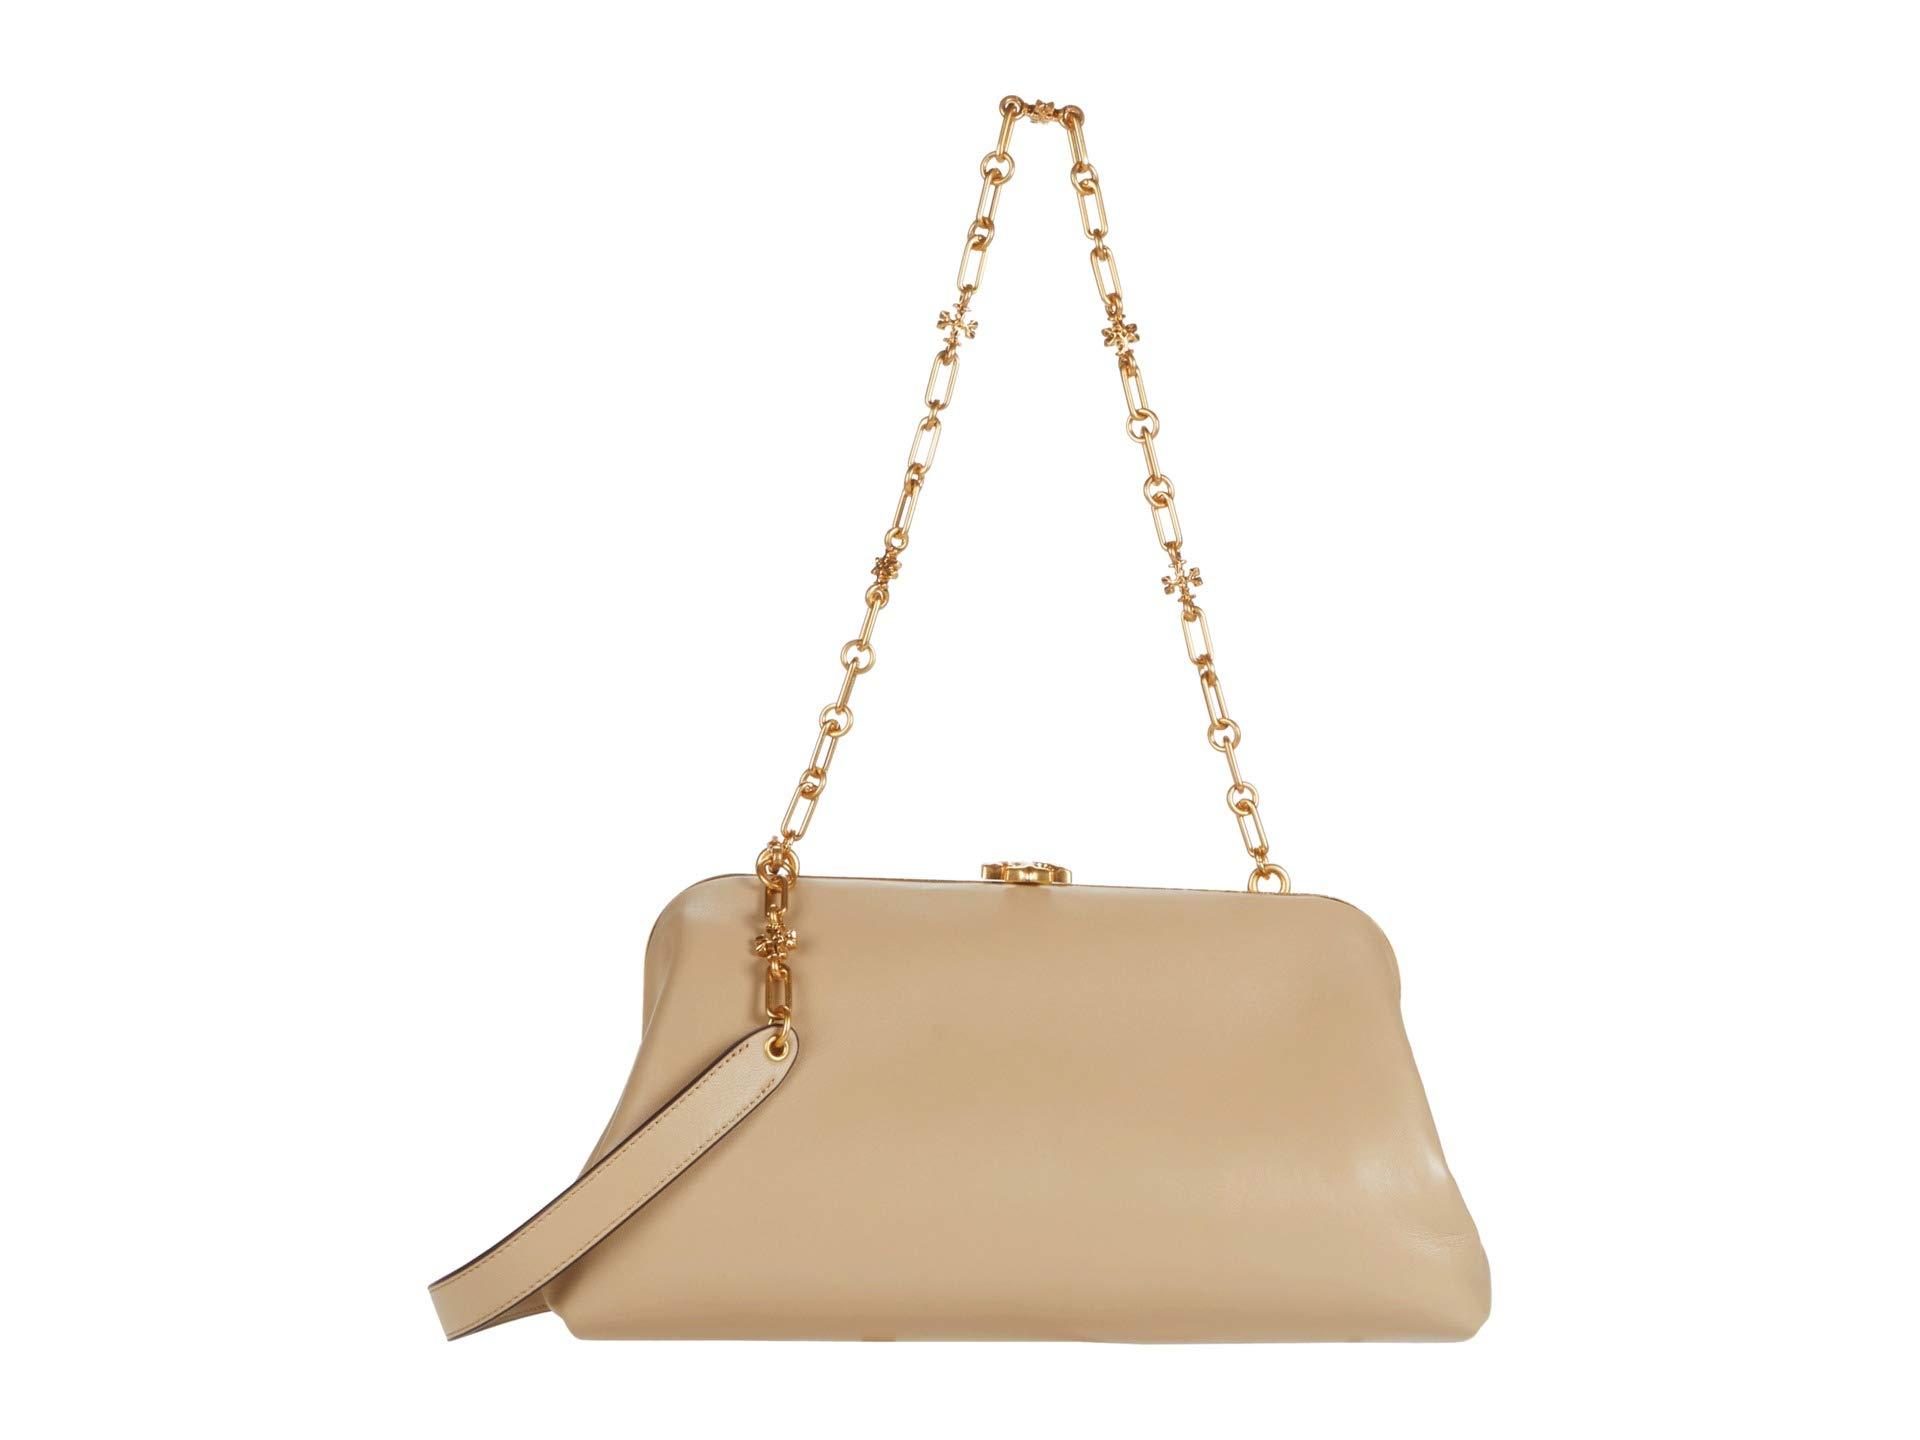 Tory Burch Cleo Bag in Natural | Lyst